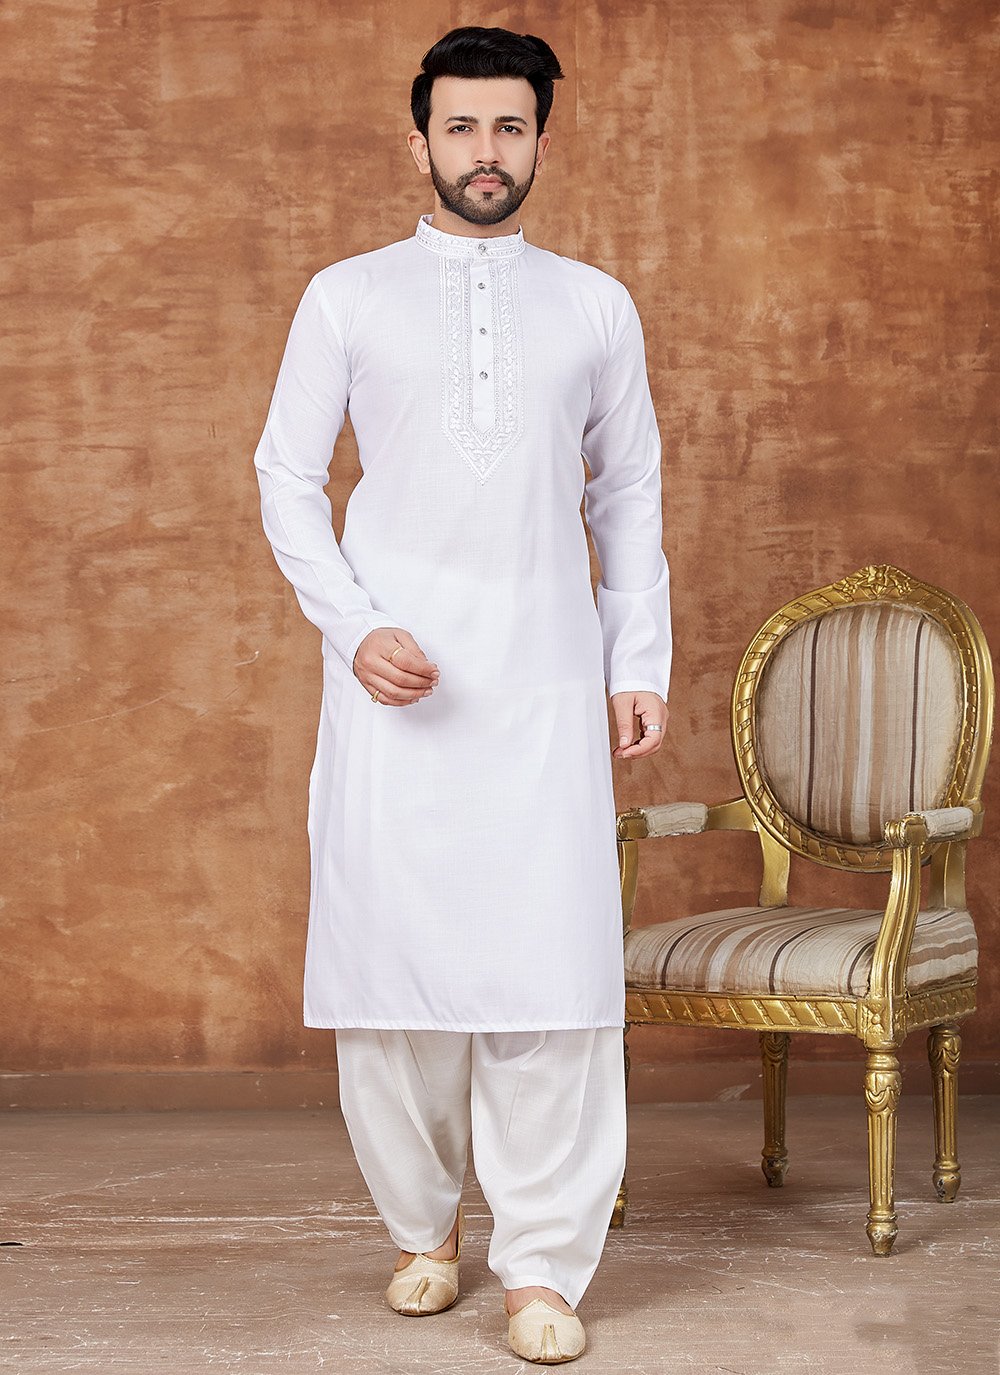 Top 18 Latest Pathani Suit Designs for Men | by Ulama Fashion Blog | Medium